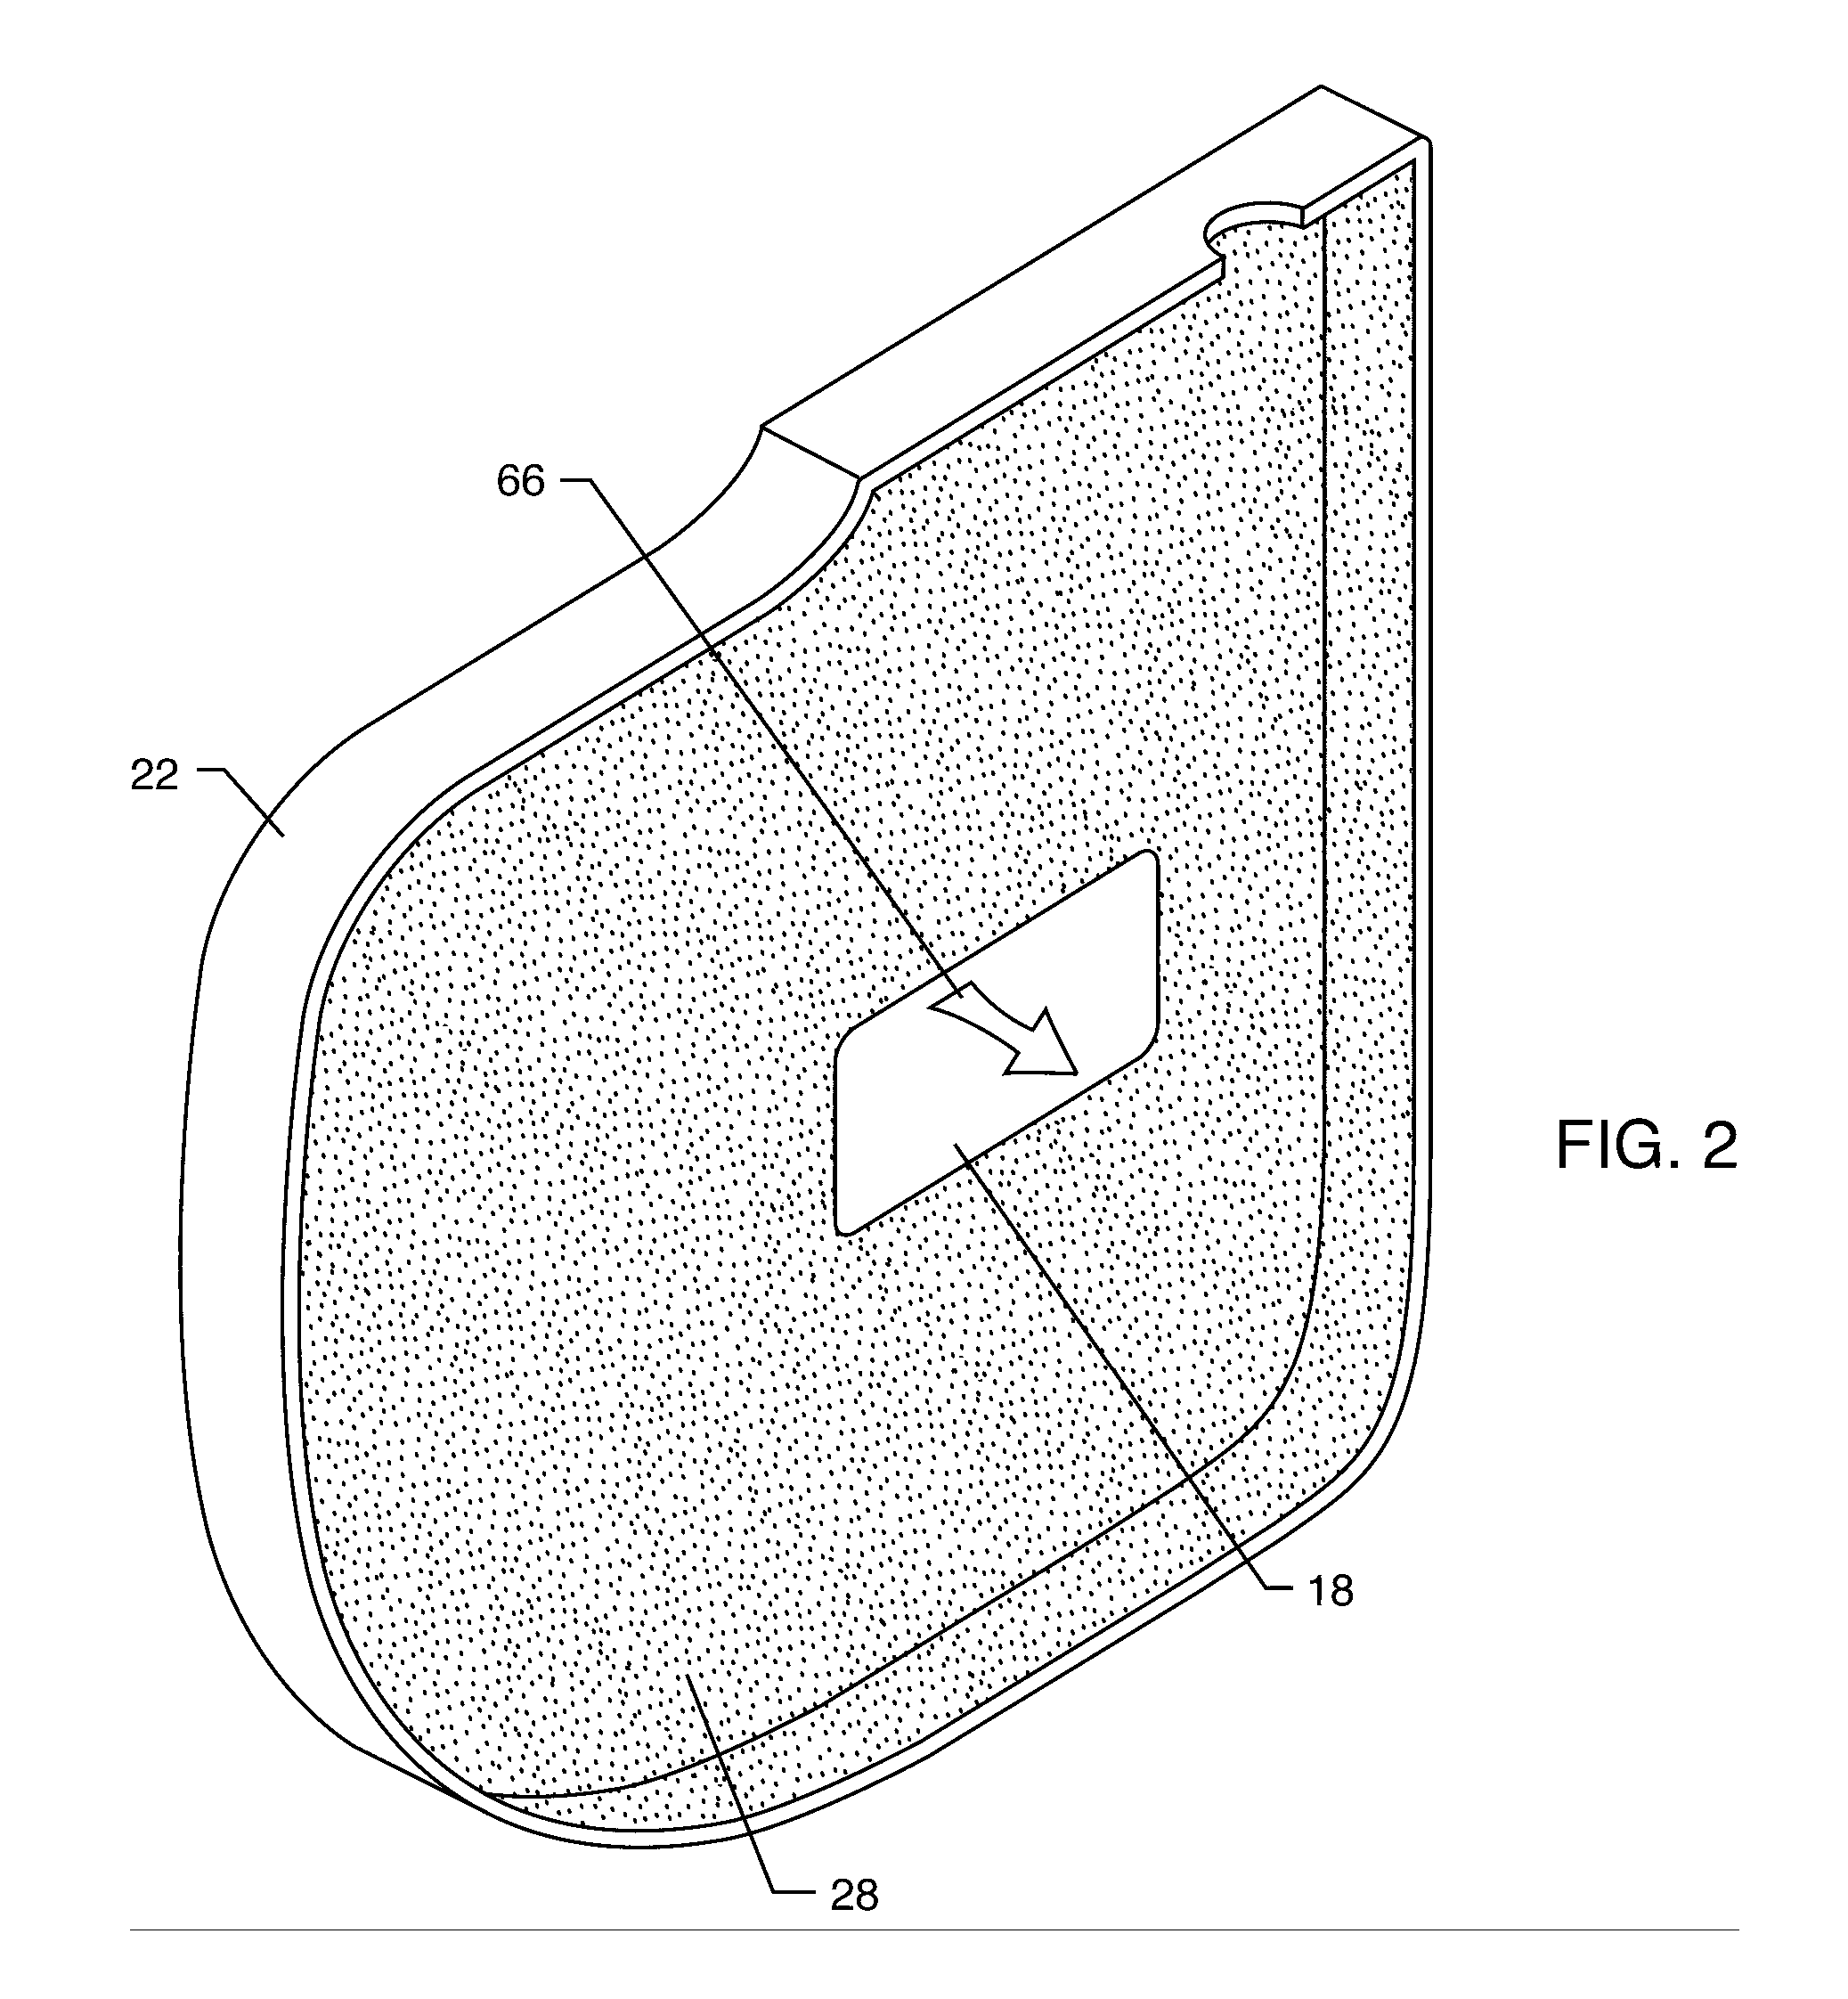 Magnetically shielded AIMD housing with window for magnetically actuated switch